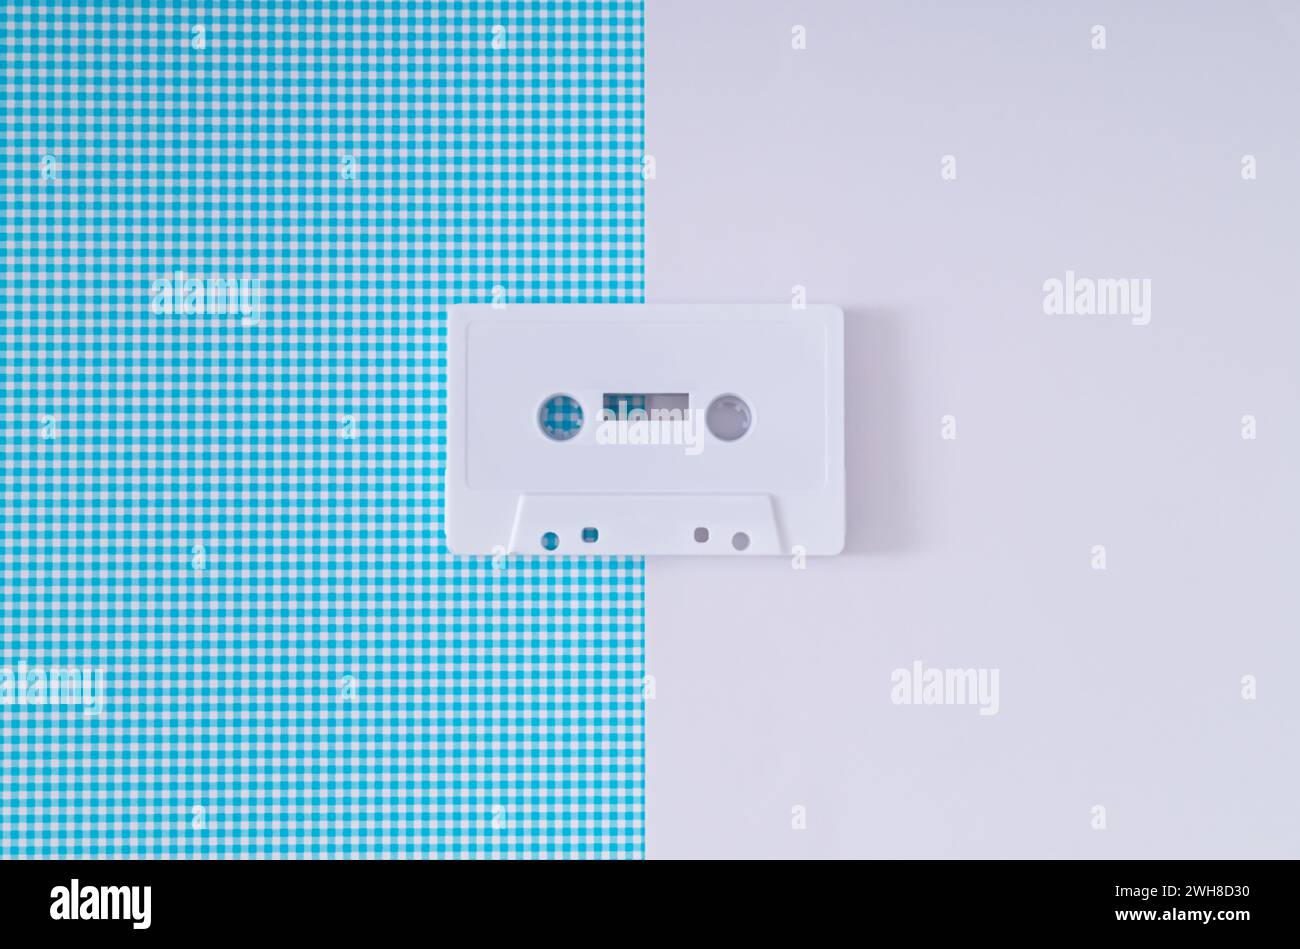 Layout of retro white audio cassette tape on white and blue background. Creative concept of old technology. 80's aesthetic. Vintage audio cassette Stock Photo